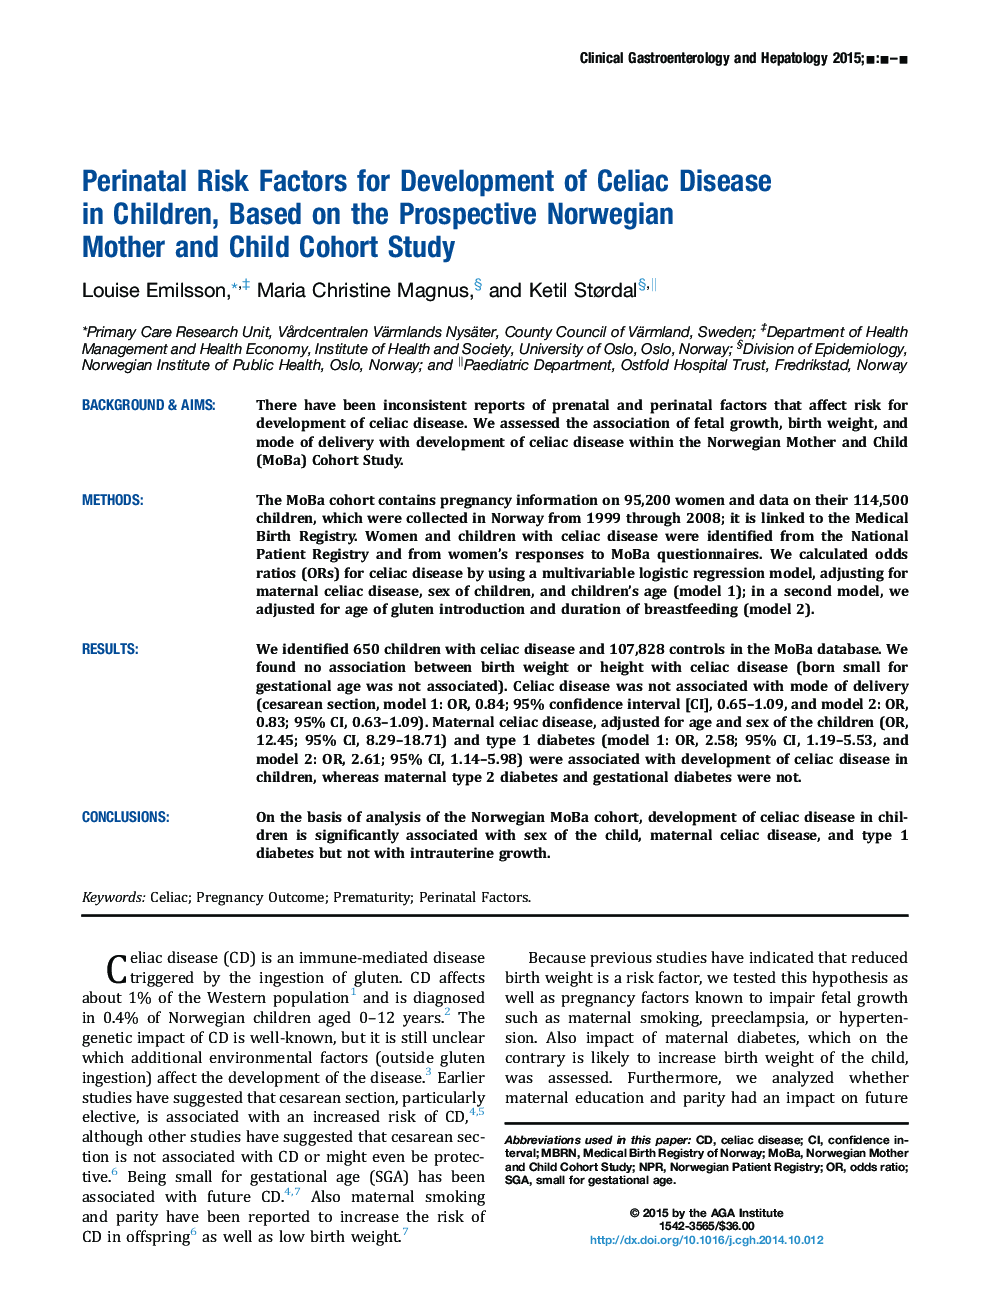 Perinatal Risk Factors for Development of Celiac Disease in Children, Based on the Prospective Norwegian Mother and Child Cohort Study